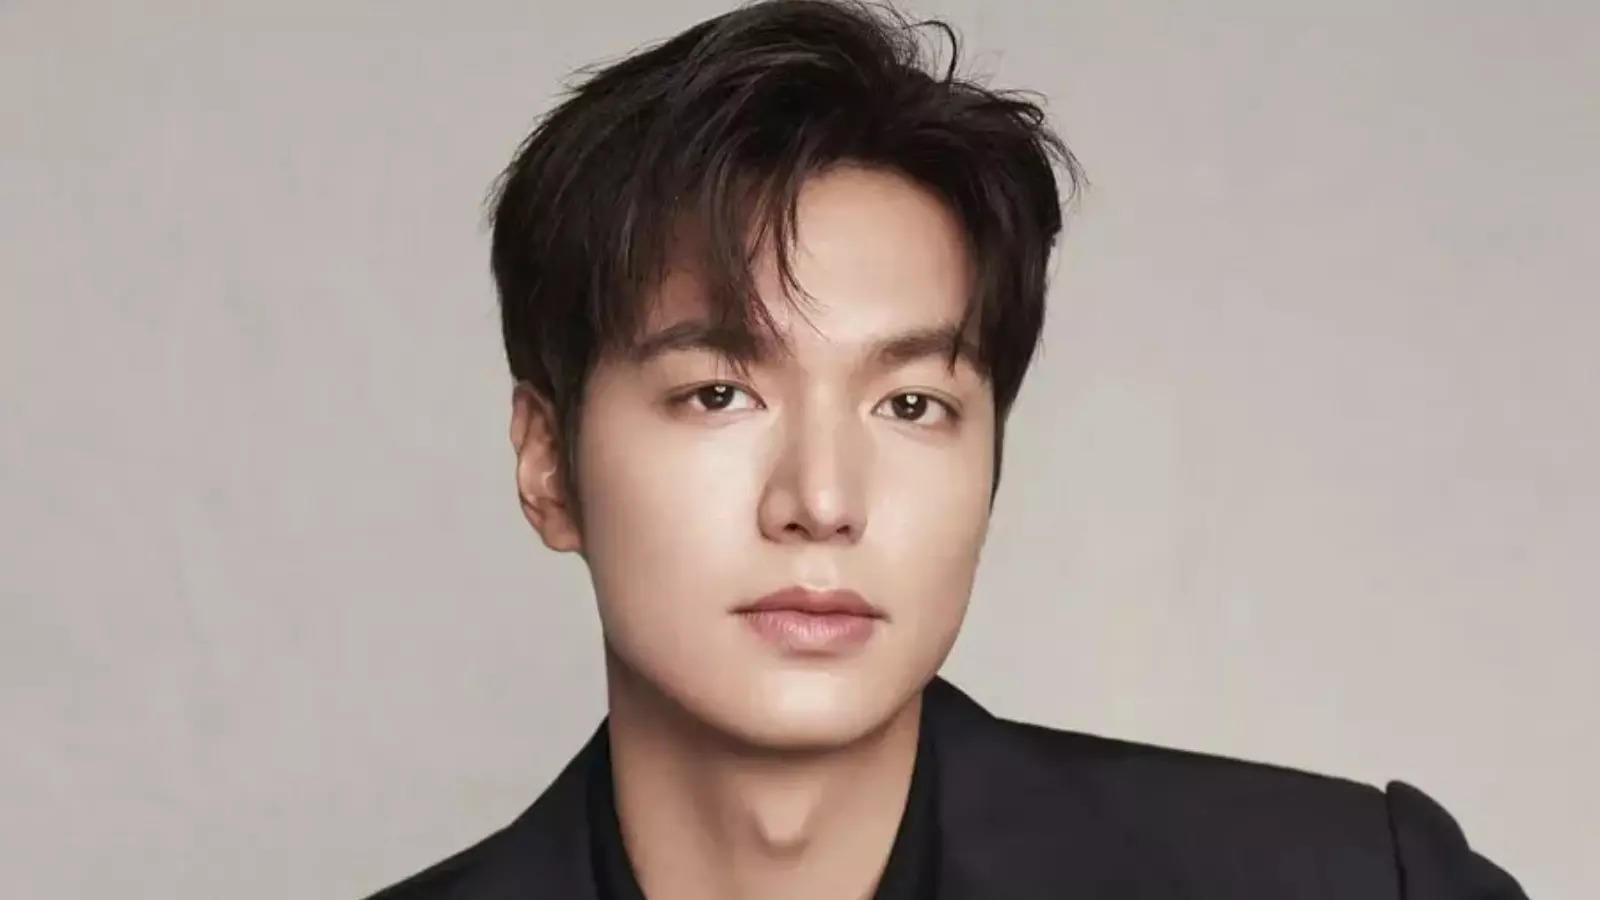 Lee Min Ho fans from India send his name to Mars on NASA mission ...